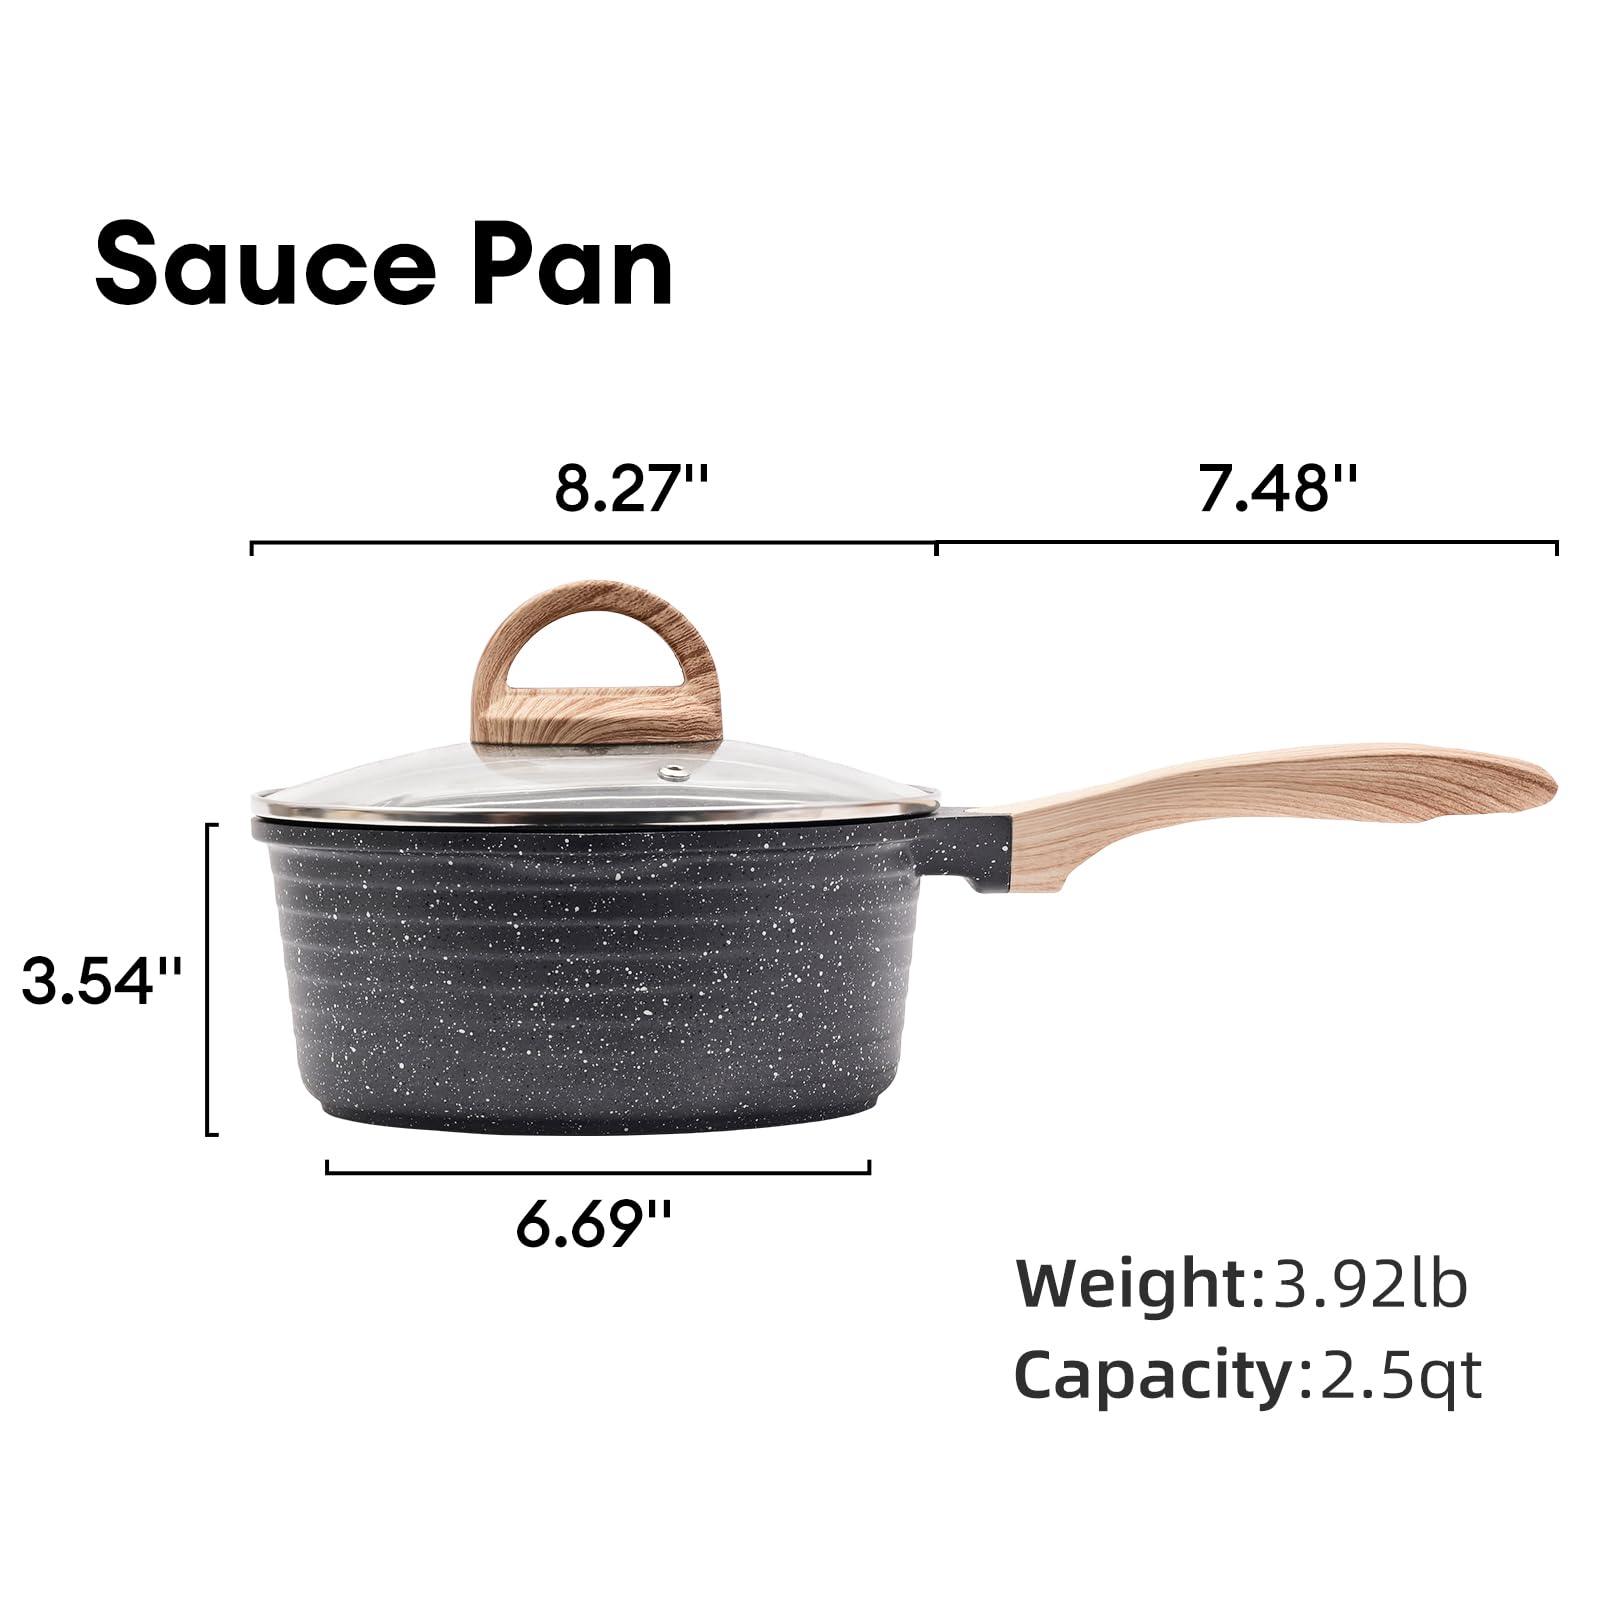 JEETEE 2.5 Quart Sauce Pan with Lid, Non Stick Small Pot with German Granite Coating, Masterclass Granite Stone Cookware Sauce Pot for Cooking, PFOA/PFOS Free - CookCave